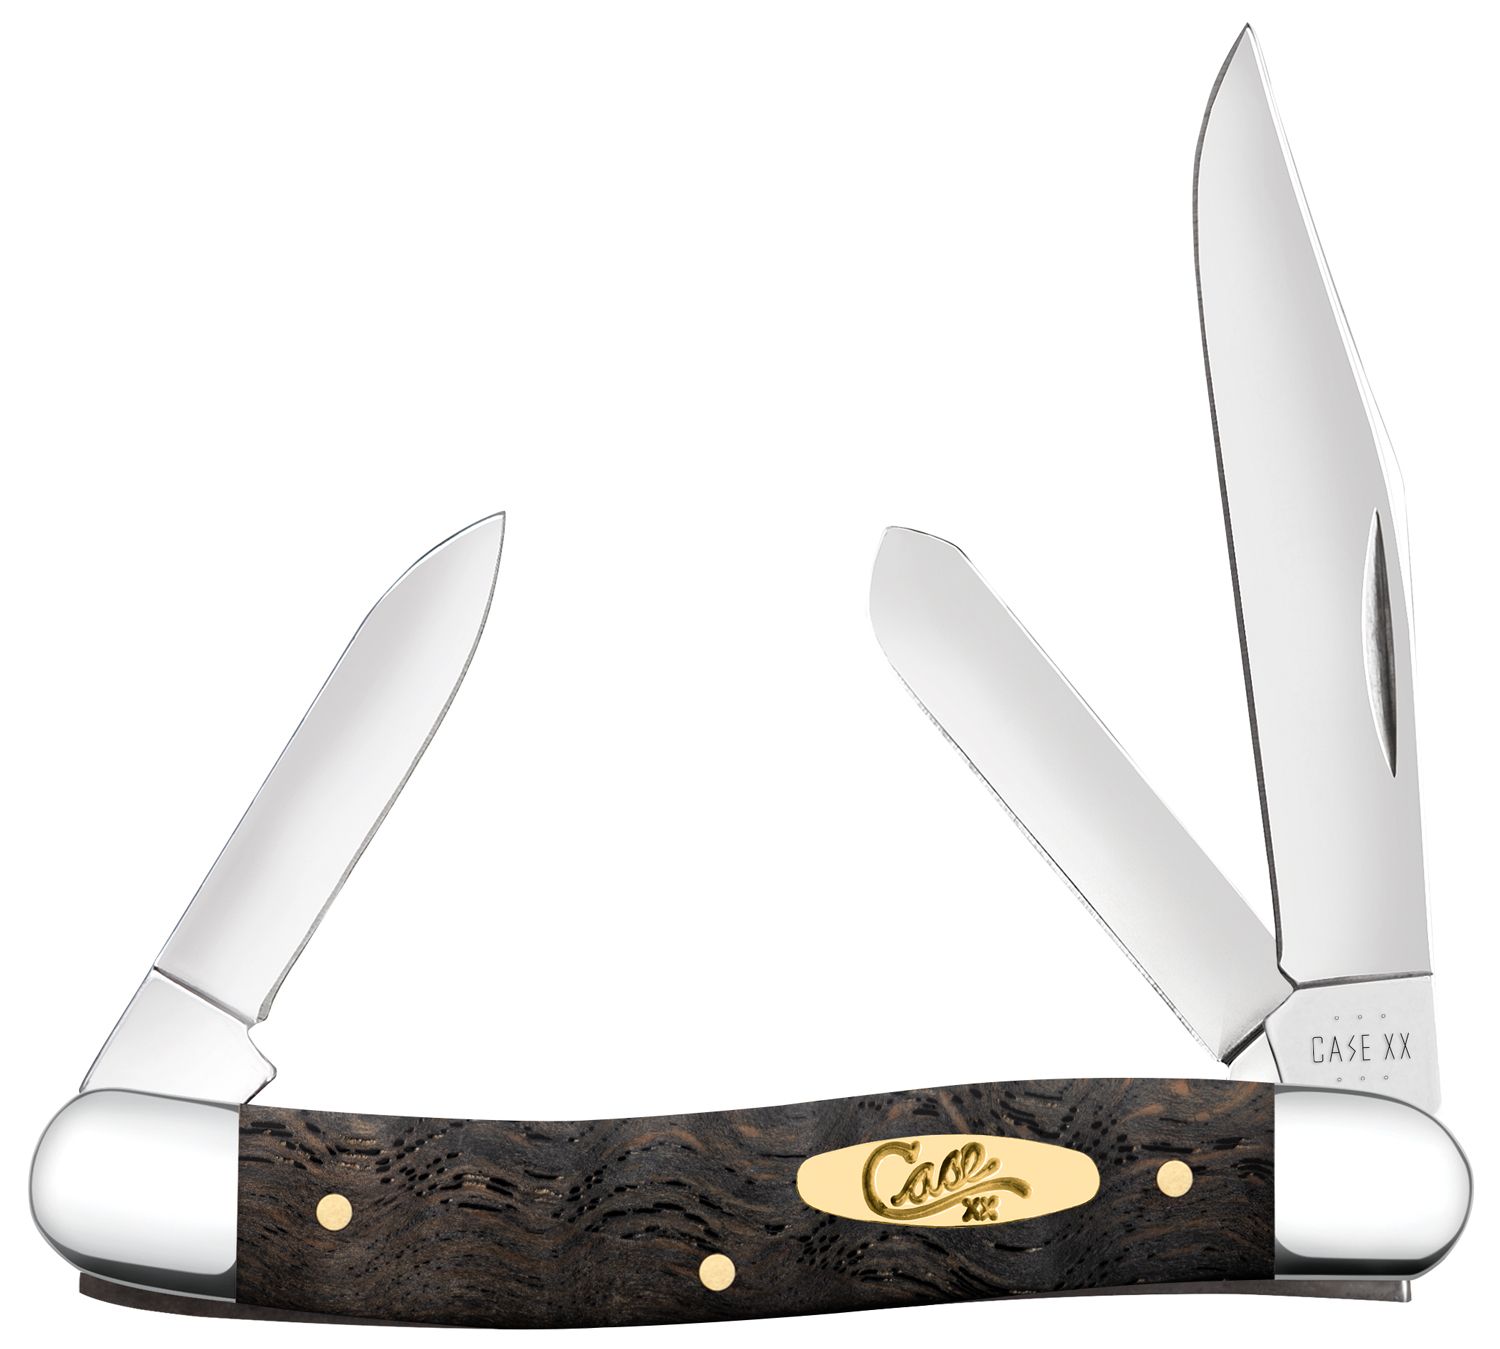 Quick tips about pocket knife safety for Cub Scouts, Scouts BSA